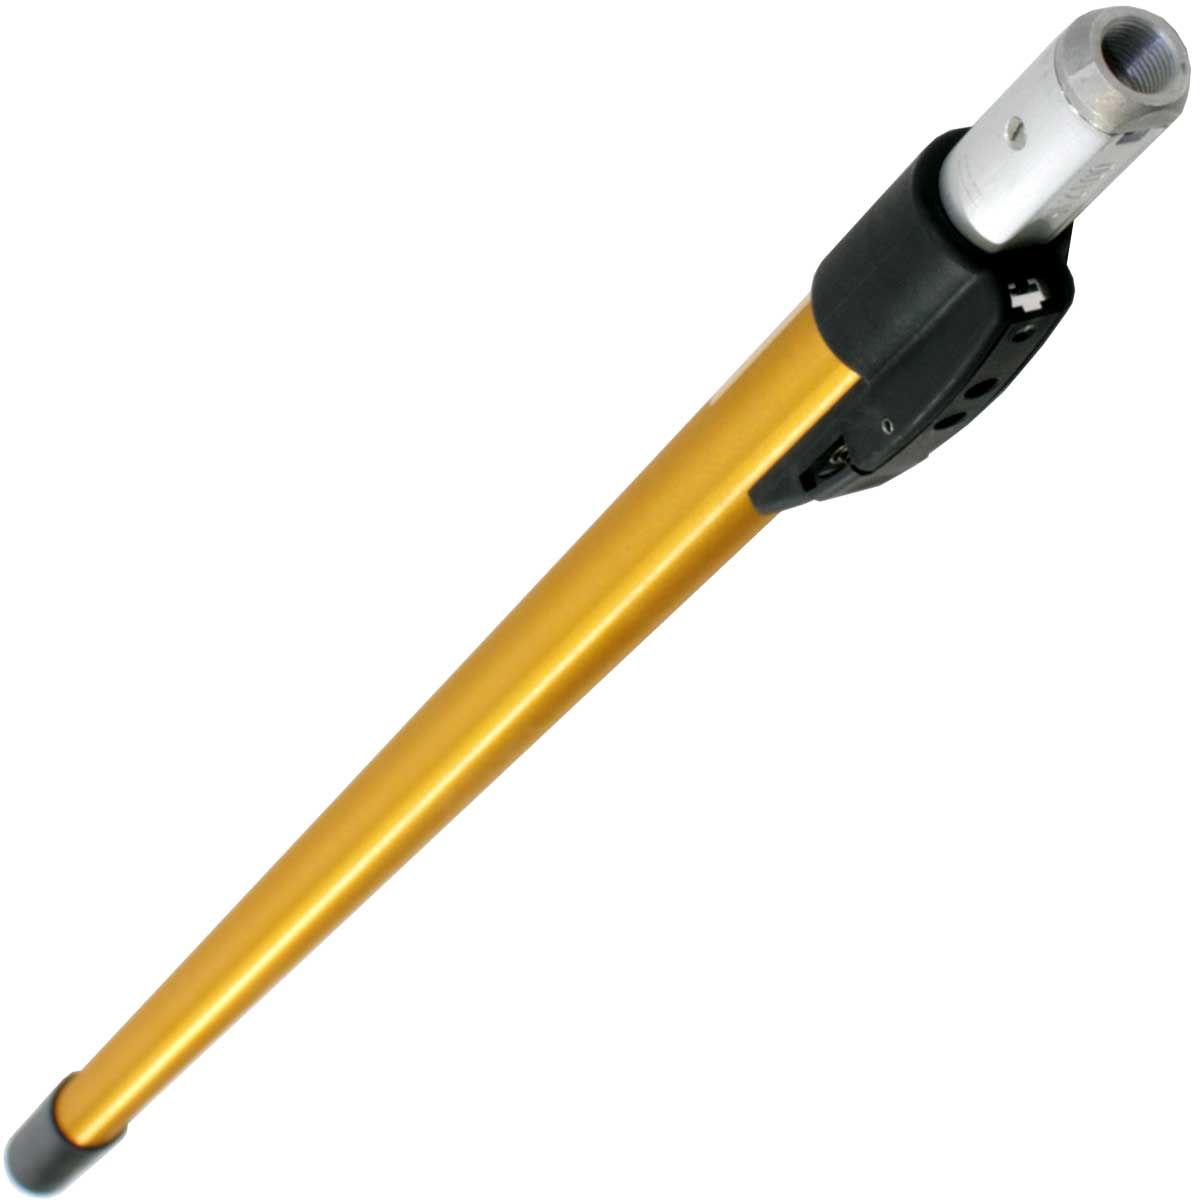 TapeTech Extendable Support Handle